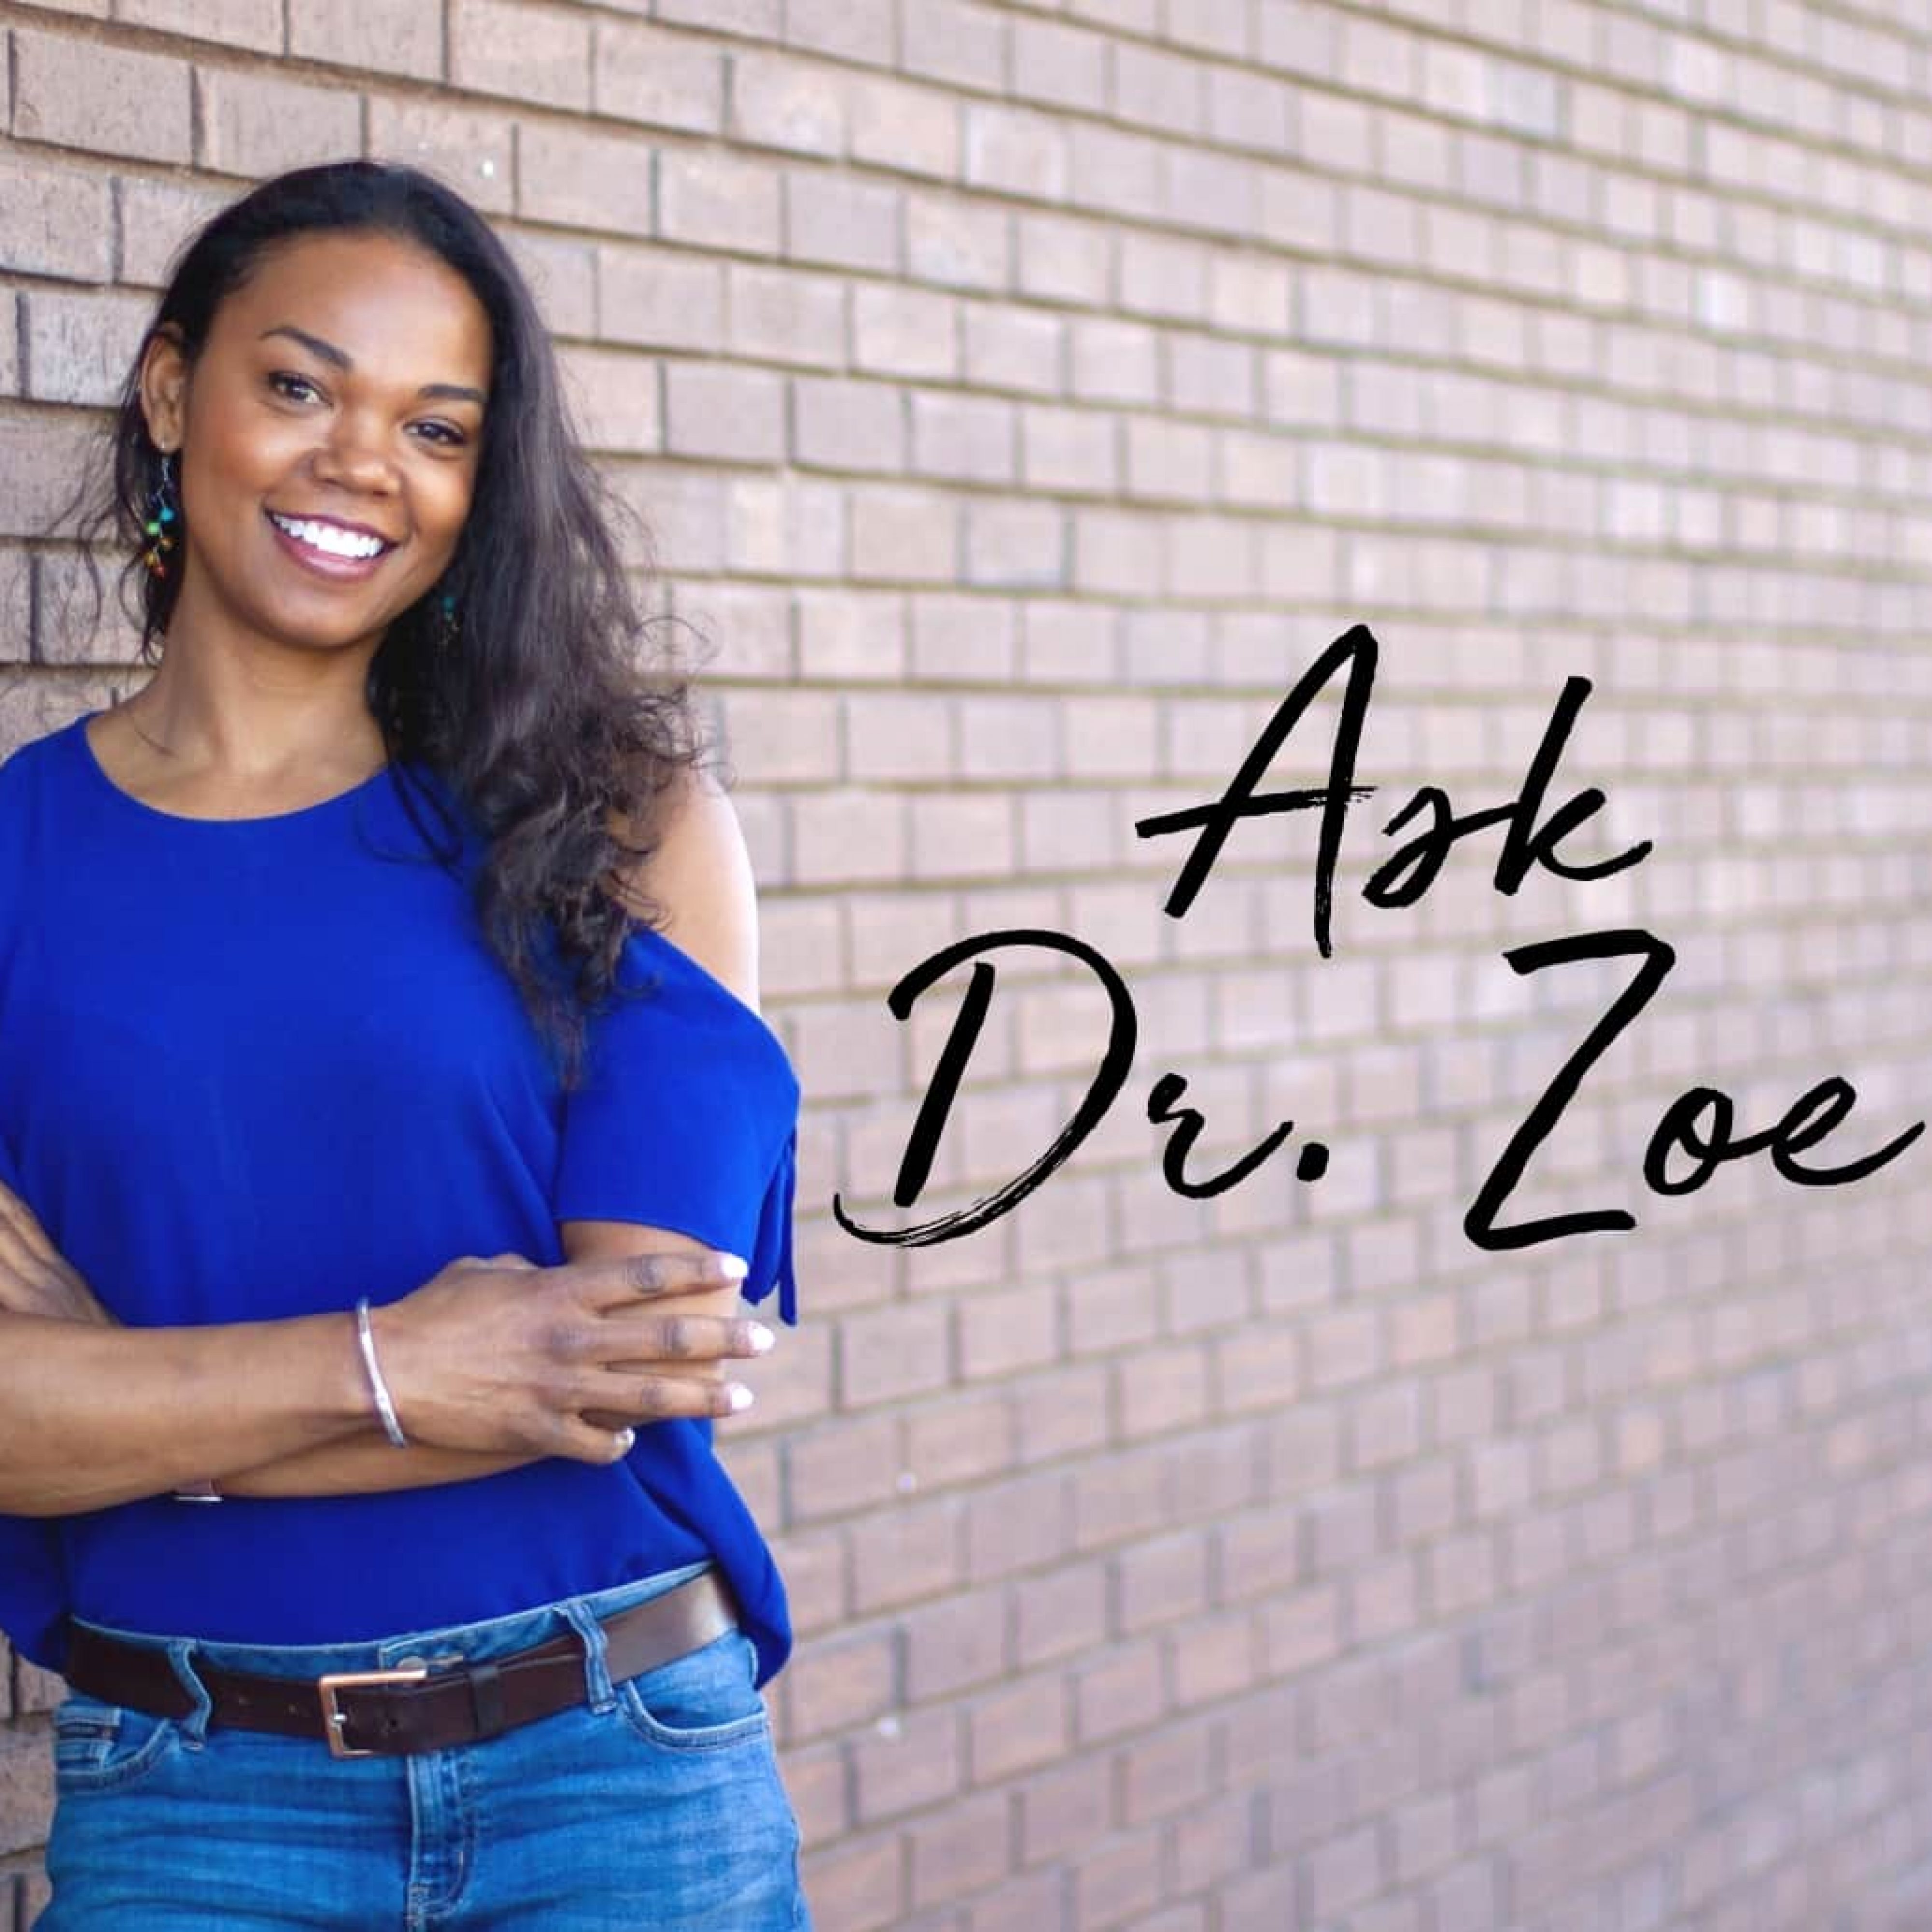 Ask Dr. Zoe - I Struggle Making Decisions—Can I Get Over This?